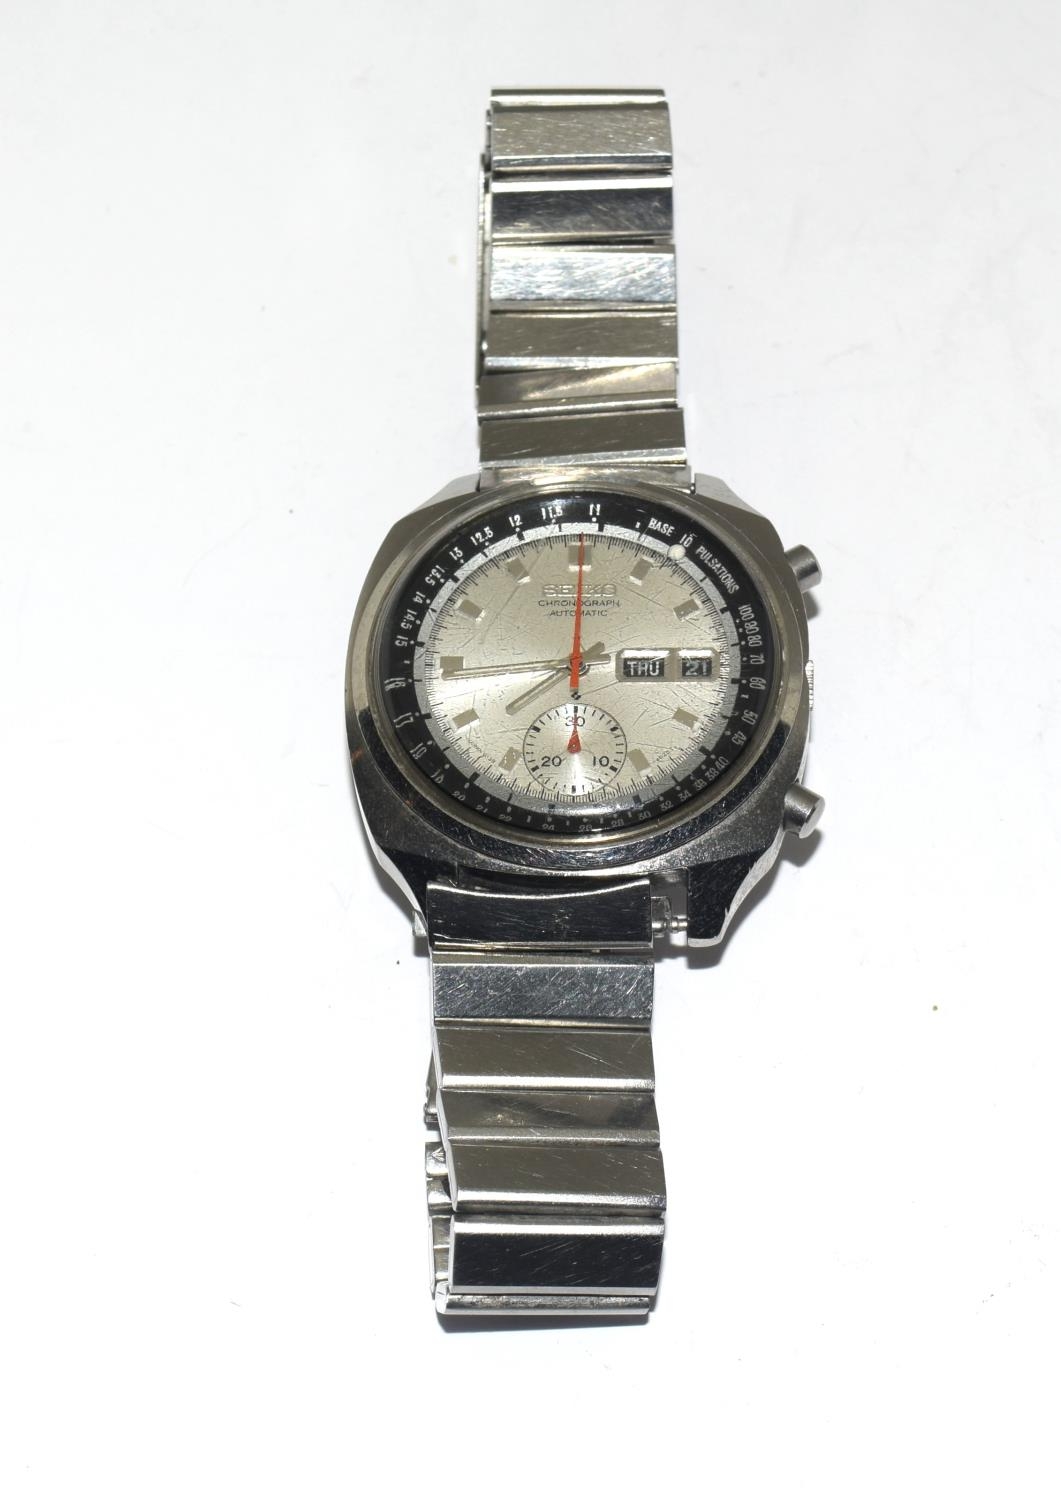 Vintage 1970s Seiko Pulsations automatic chronograph stainless steel gents watch early date March